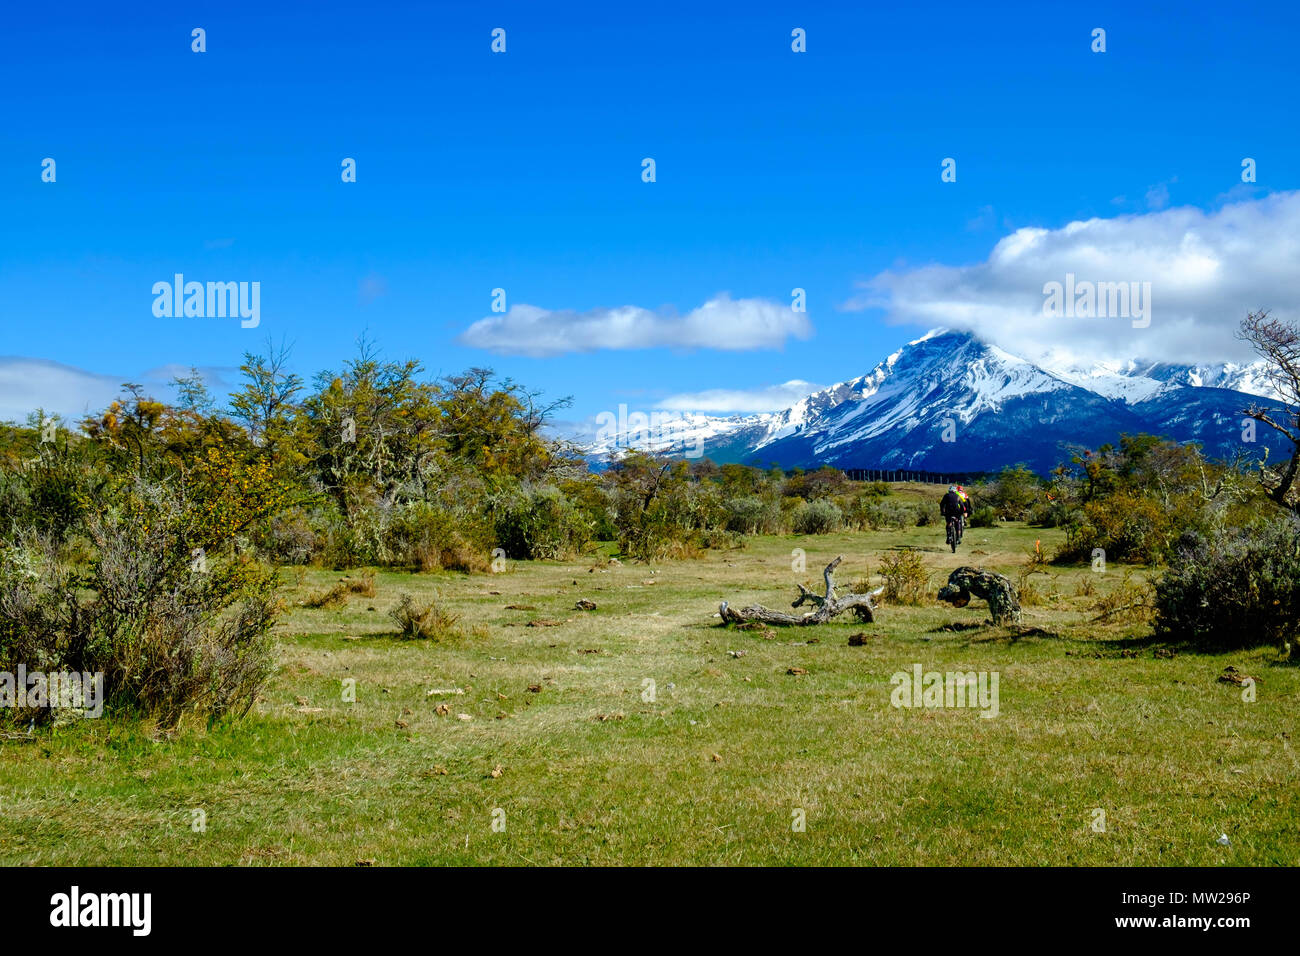 Puerto Natales, Magallanes / Chile - October 16 2016: Mountain bikers ride through fields with snowcapped mountains on the background. Stock Photo